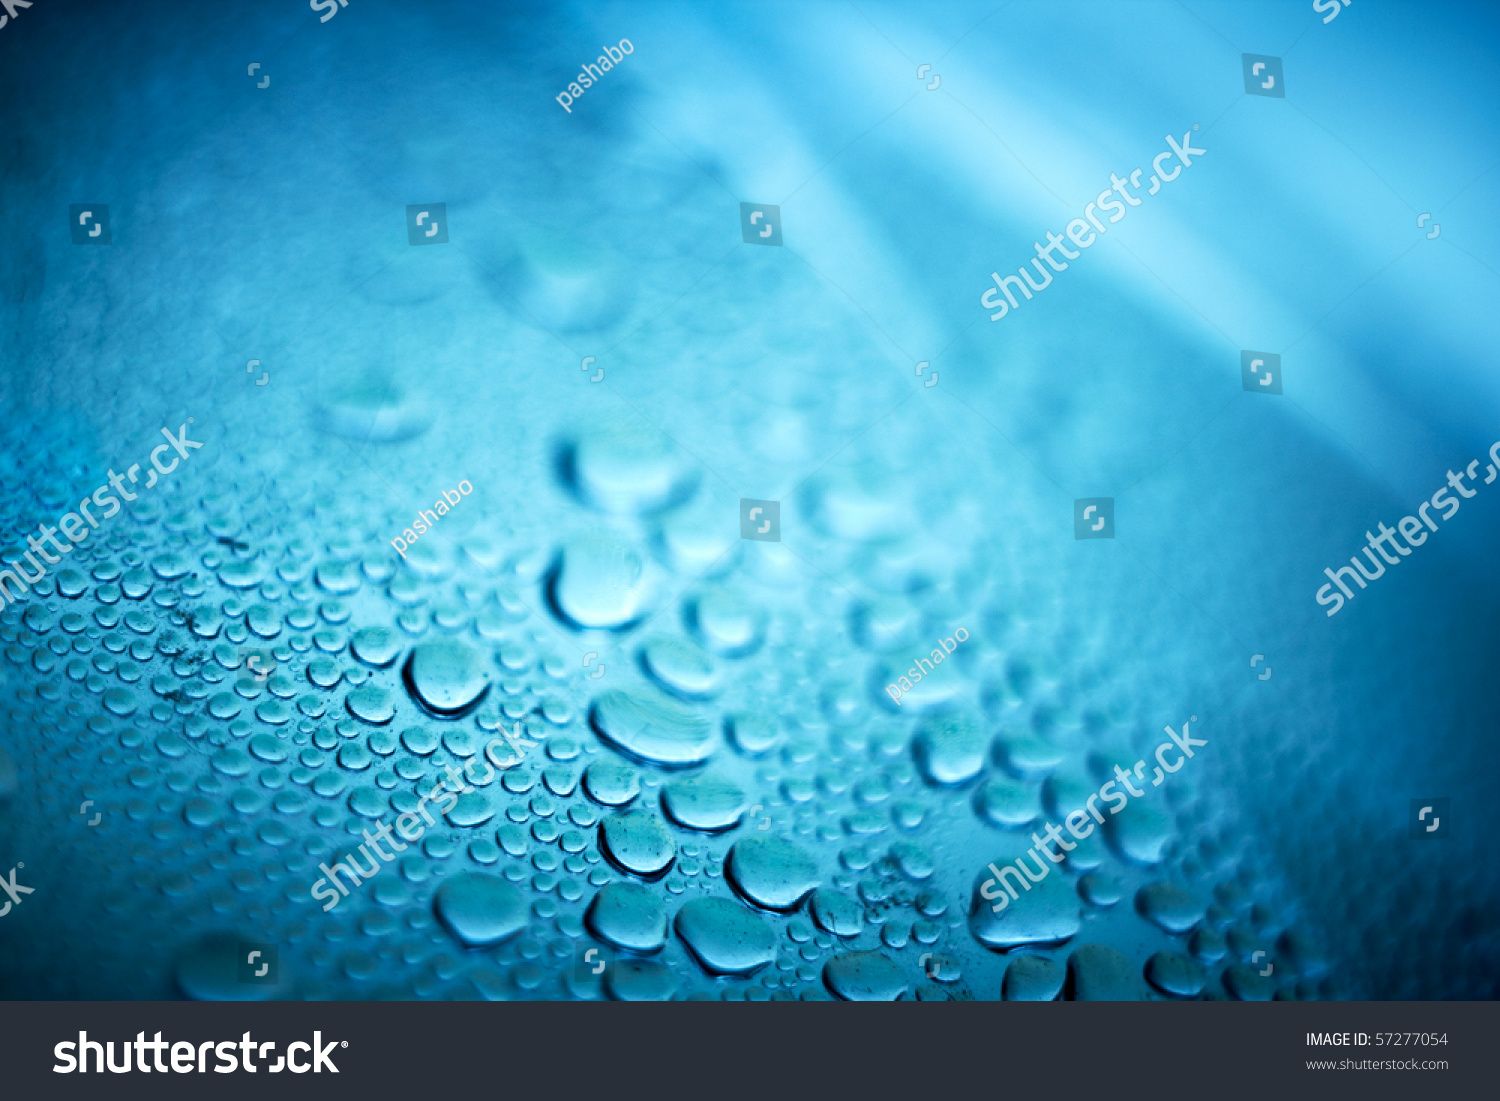 Abstract blue background. Liquid on dirty glass. #57277054